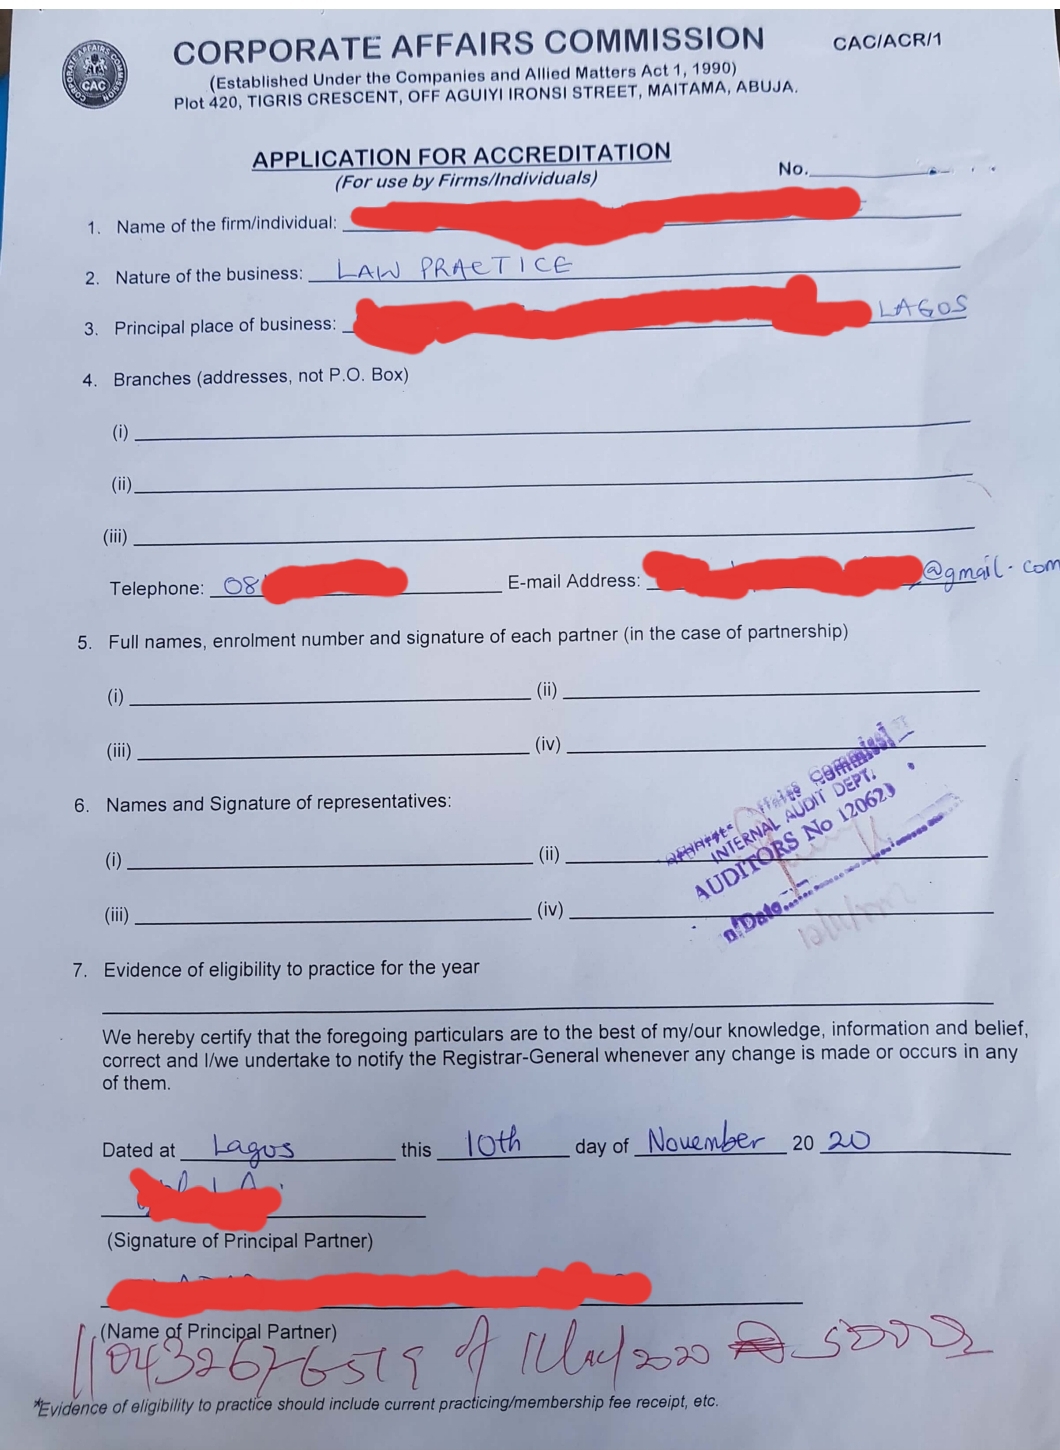 Application Form for Accreditation